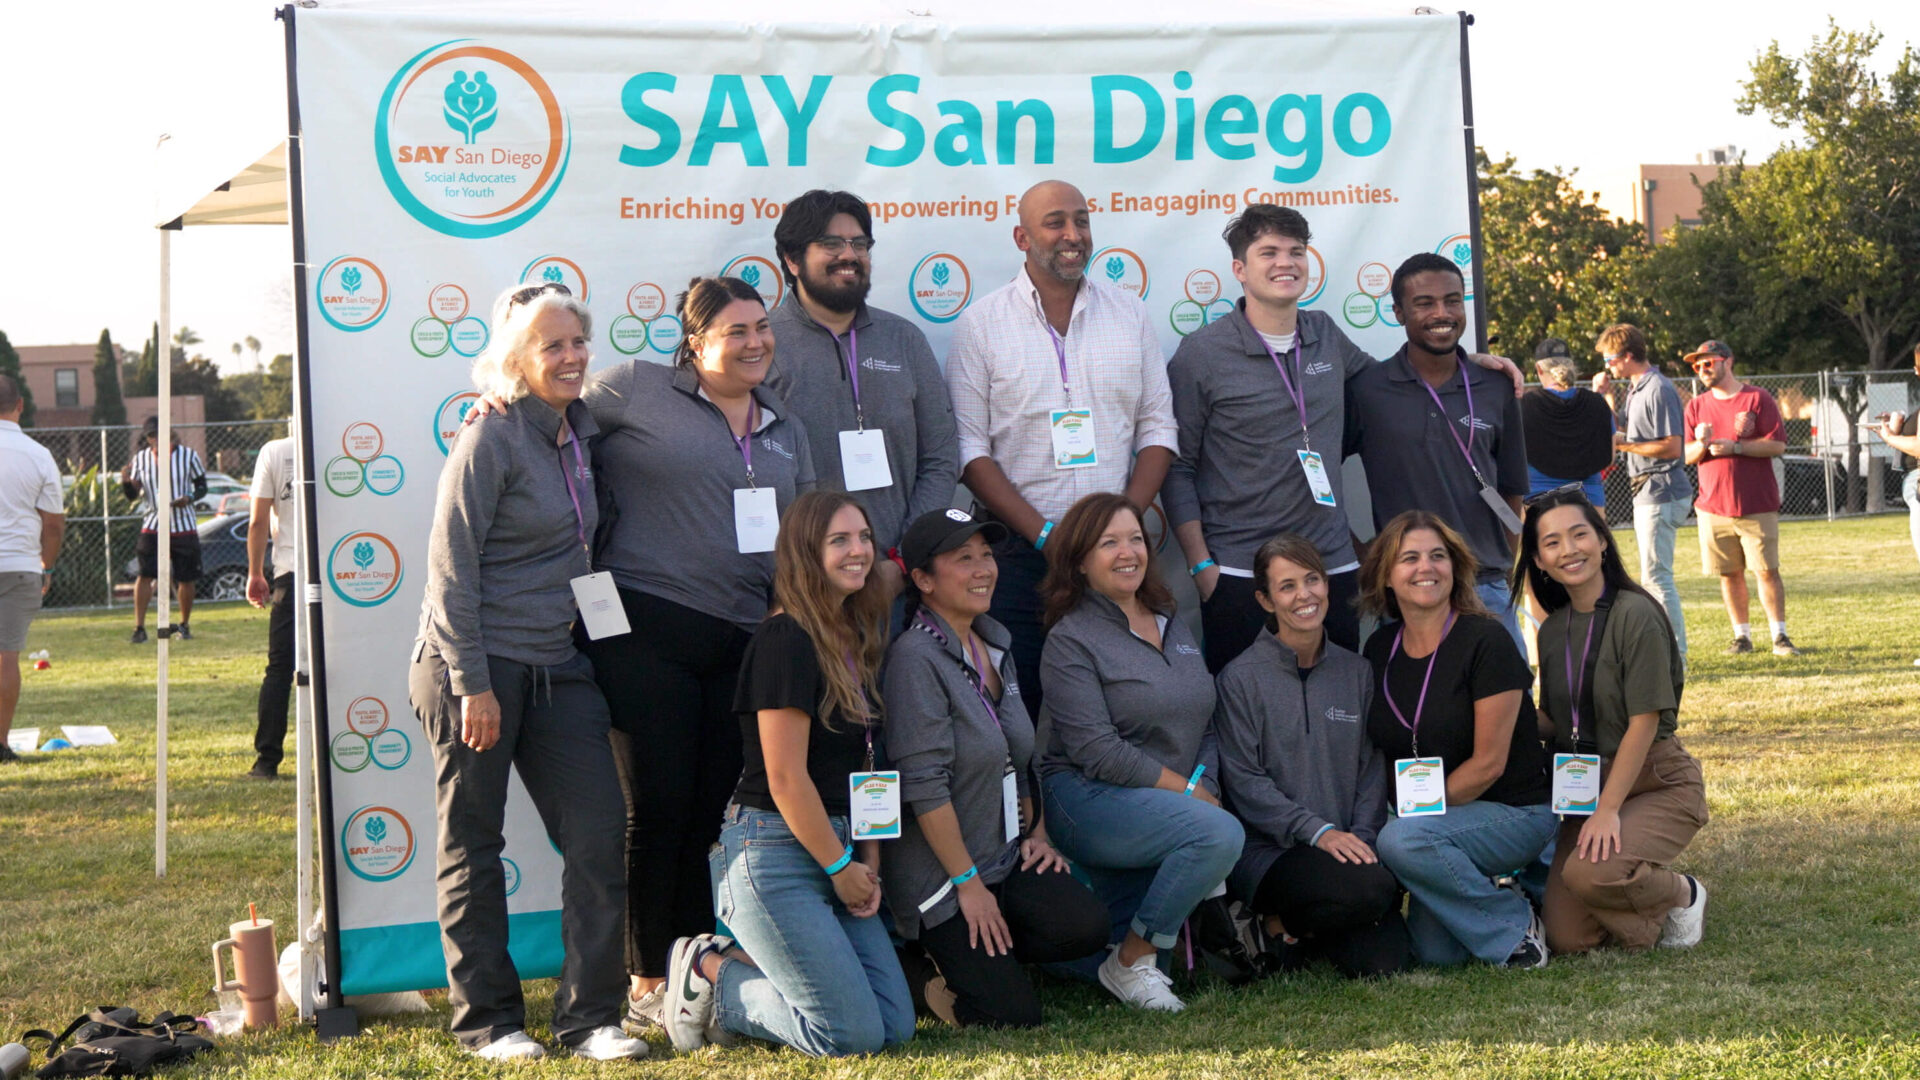 A group of people poses in front of a "SAY San Diego" banner on a grassy field, showcasing their Corporate Partnership in San Diego. They are wearing matching shirts and name tags, smiling for the photo. Trees and other people are visible in the background.